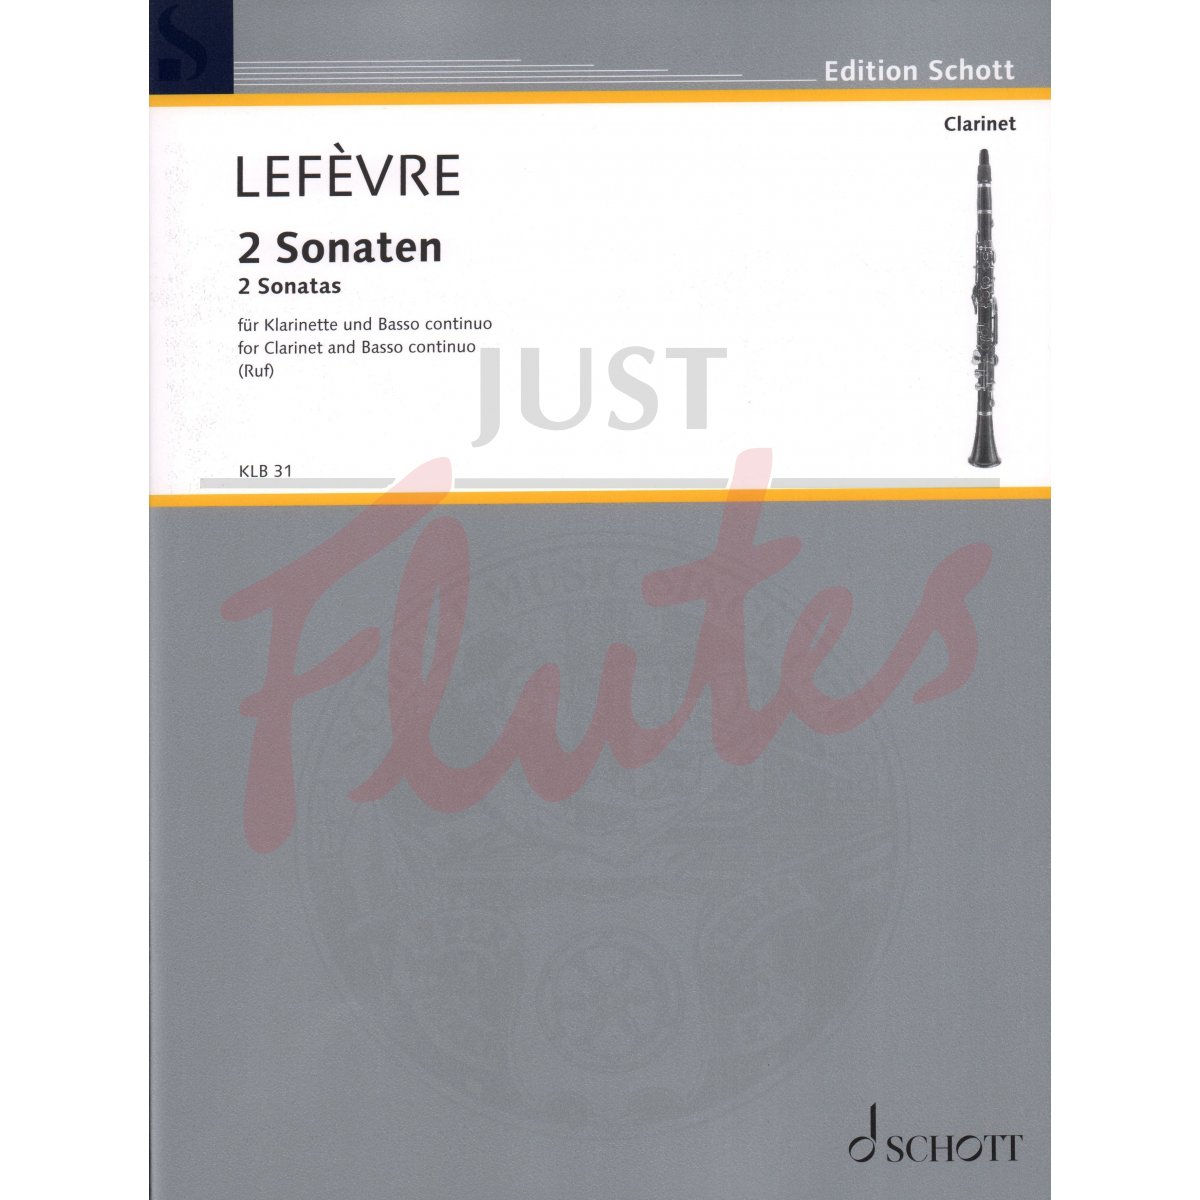 Two Sonatas for Clarinet and Basso Continuo